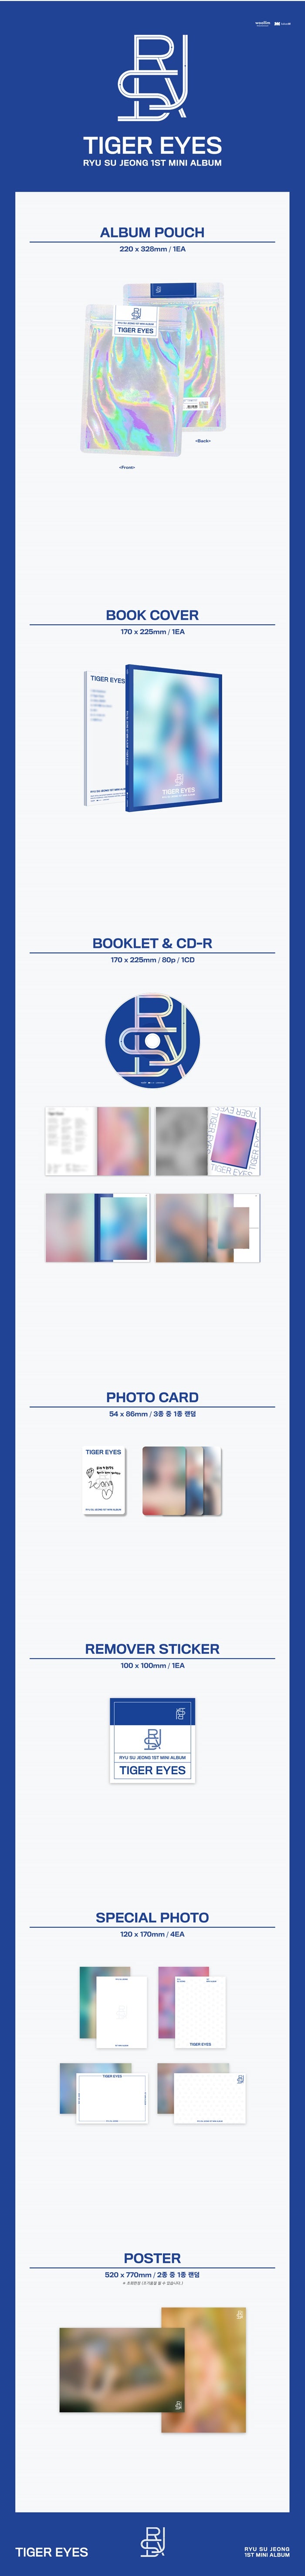 1 CD
1 Booklet
1 Photo Card
1 Sticker
4 Special Photos